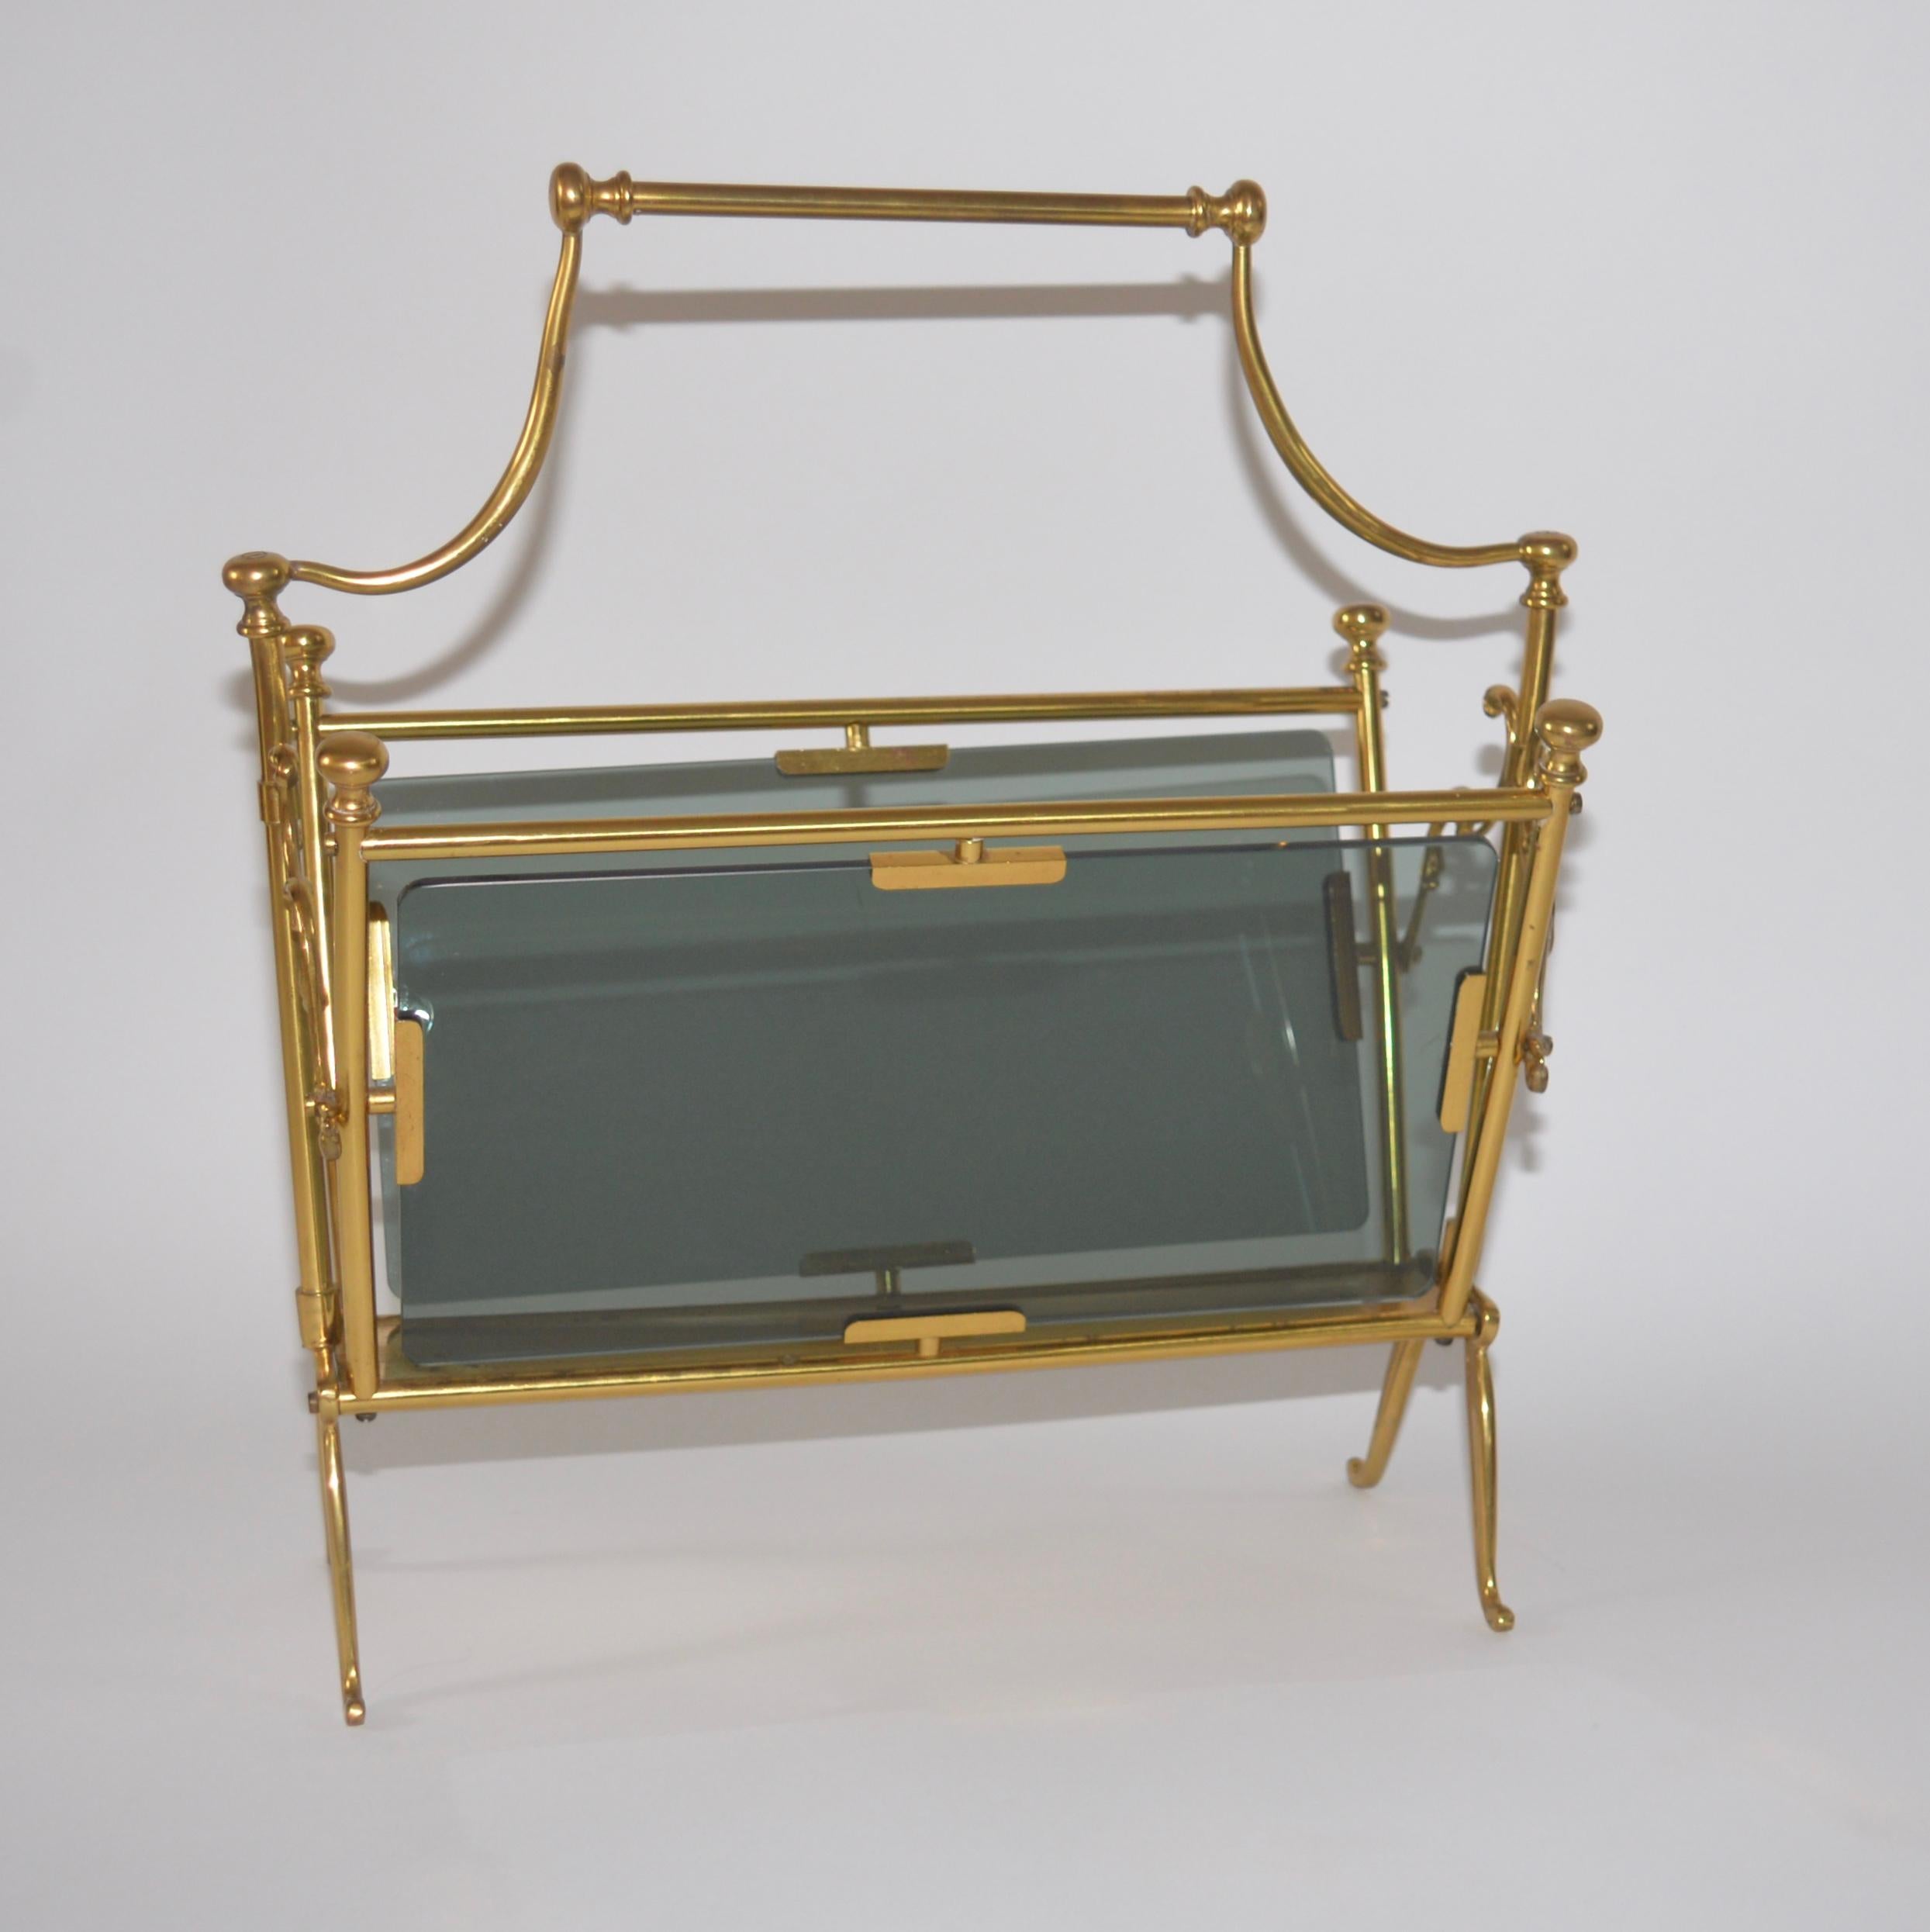 Original French vintage brass magazine rack by Maison Bagues in the Hollywood Regency style. The lovely intricate solid brass frame has scroll features and smoked glass panels. A superb quality item that you would expect from Maison Bagues.